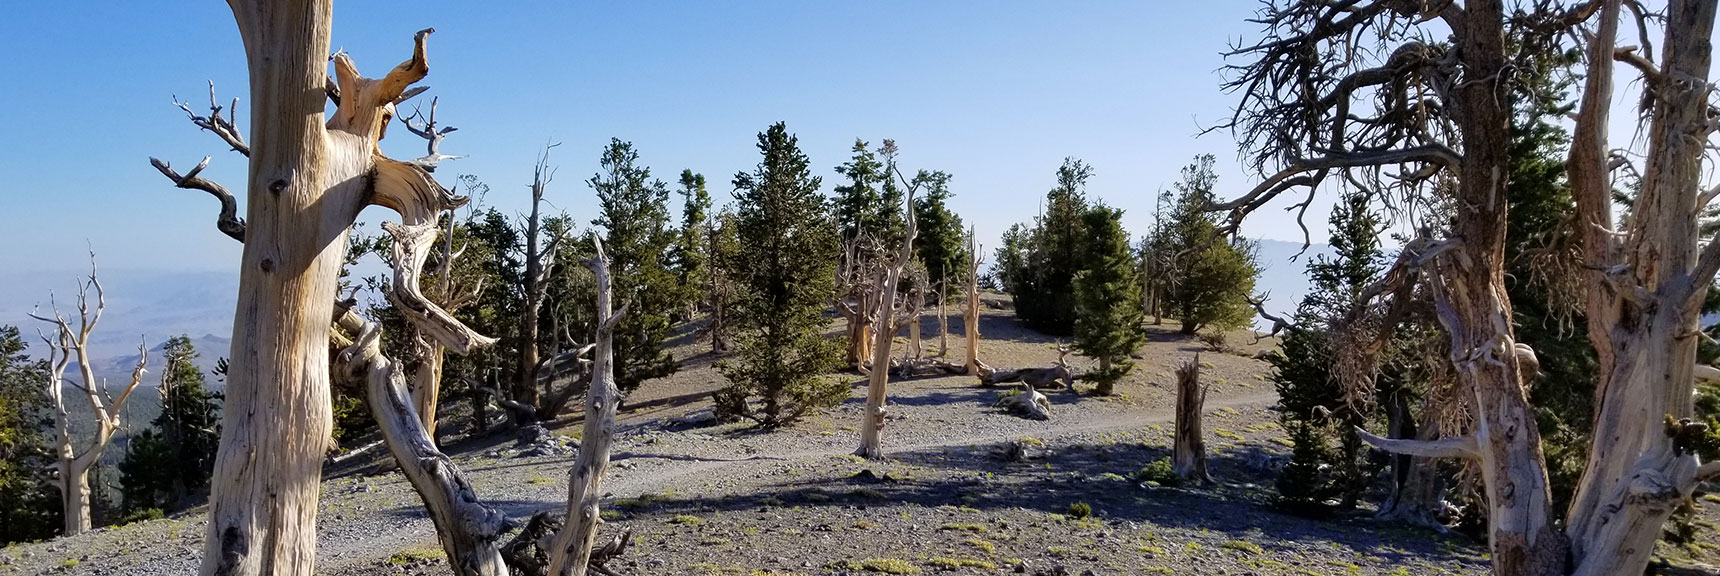 First Plateau on the North Loop Trail to Mummy Mountain in the Mt. Charleston Wilderness, Nevada